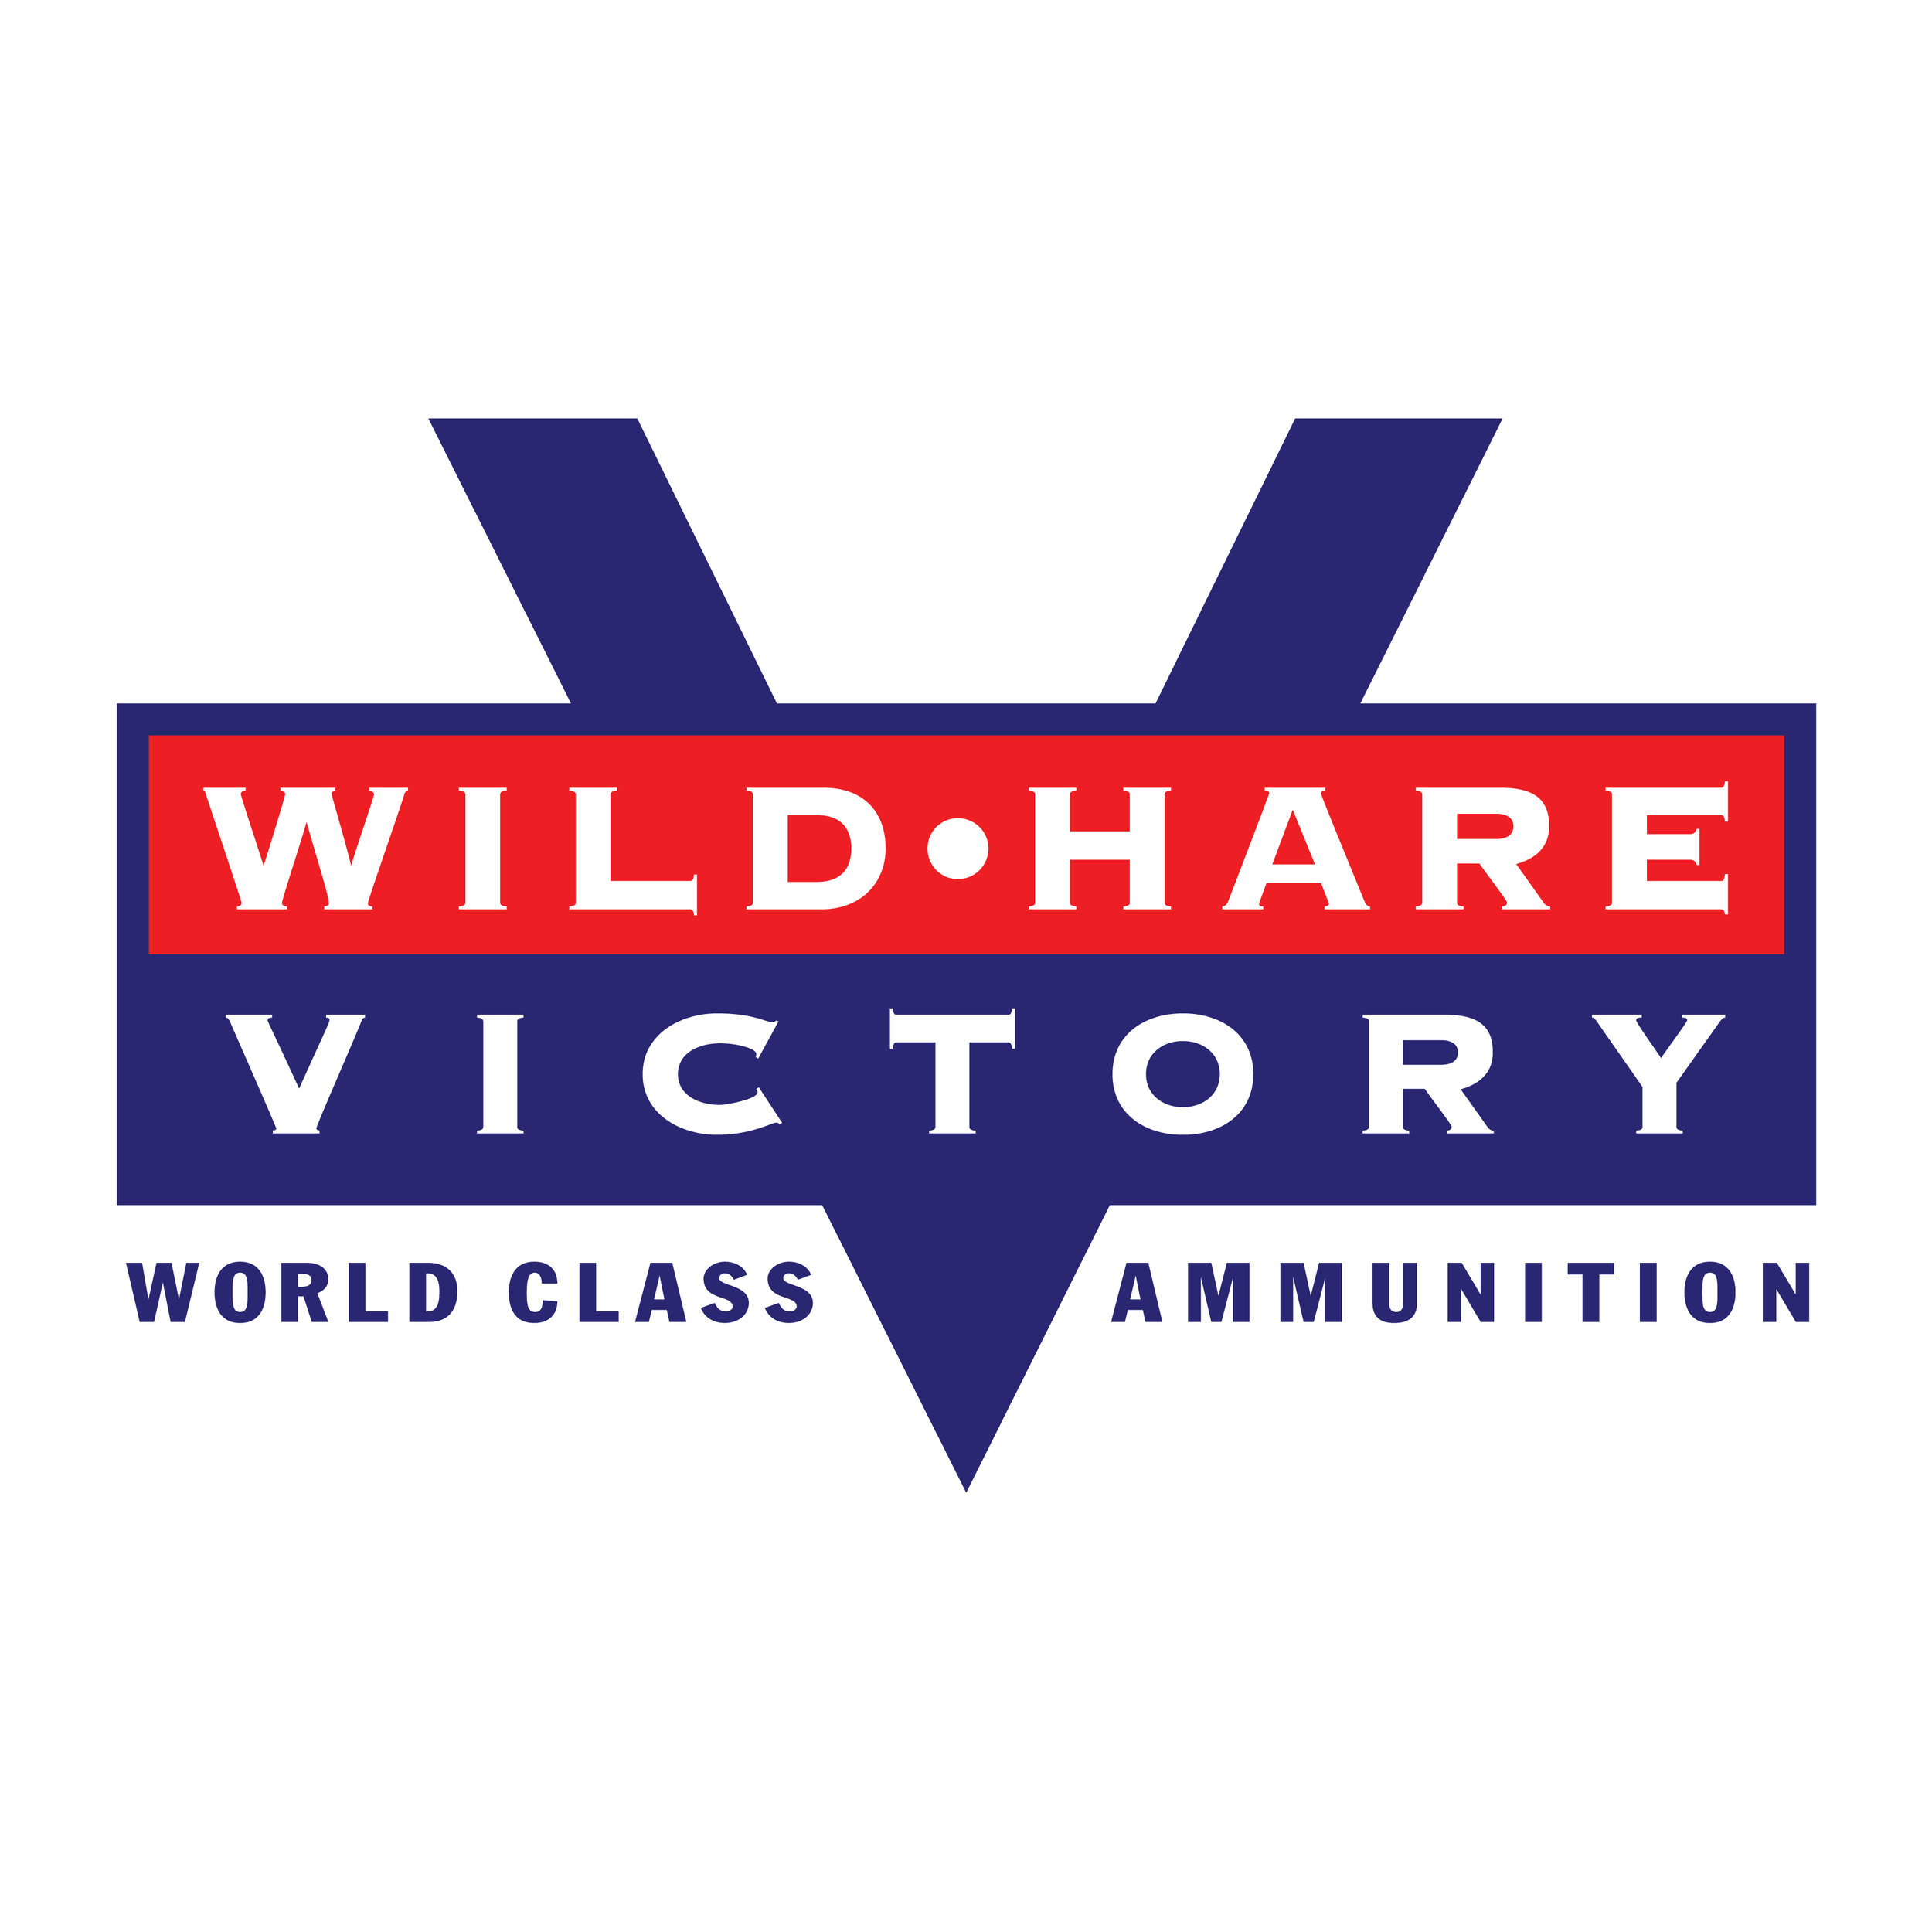  Wild•Hare Victory World Class Ammunition logo  Design, branding and creative direction by Chuck Mitchell 